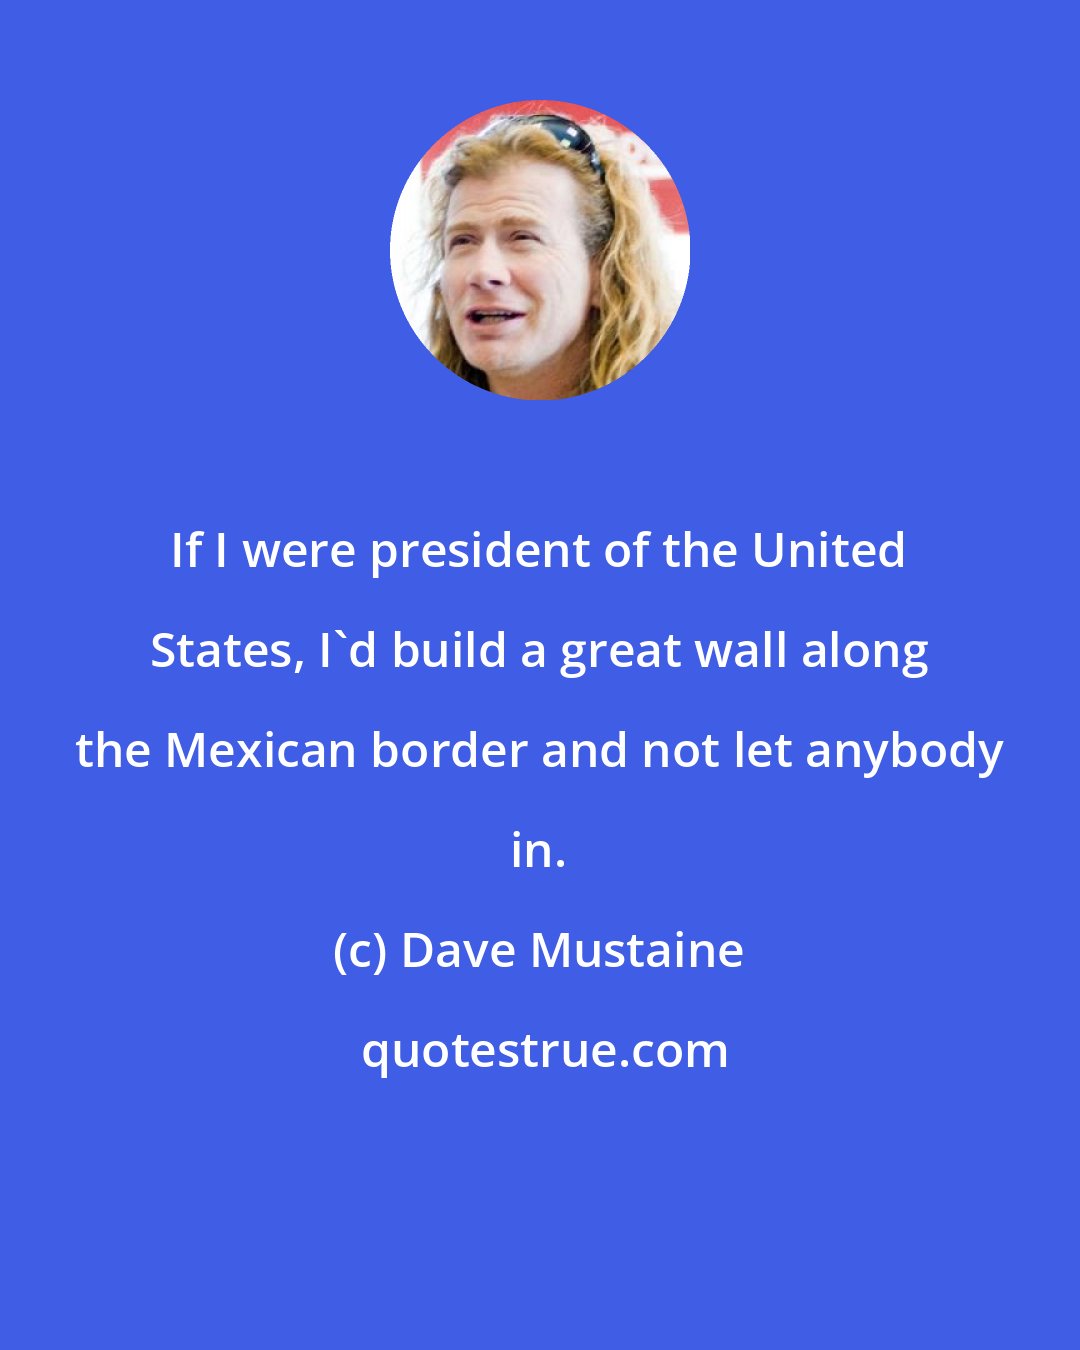 Dave Mustaine: If I were president of the United States, I'd build a great wall along the Mexican border and not let anybody in.